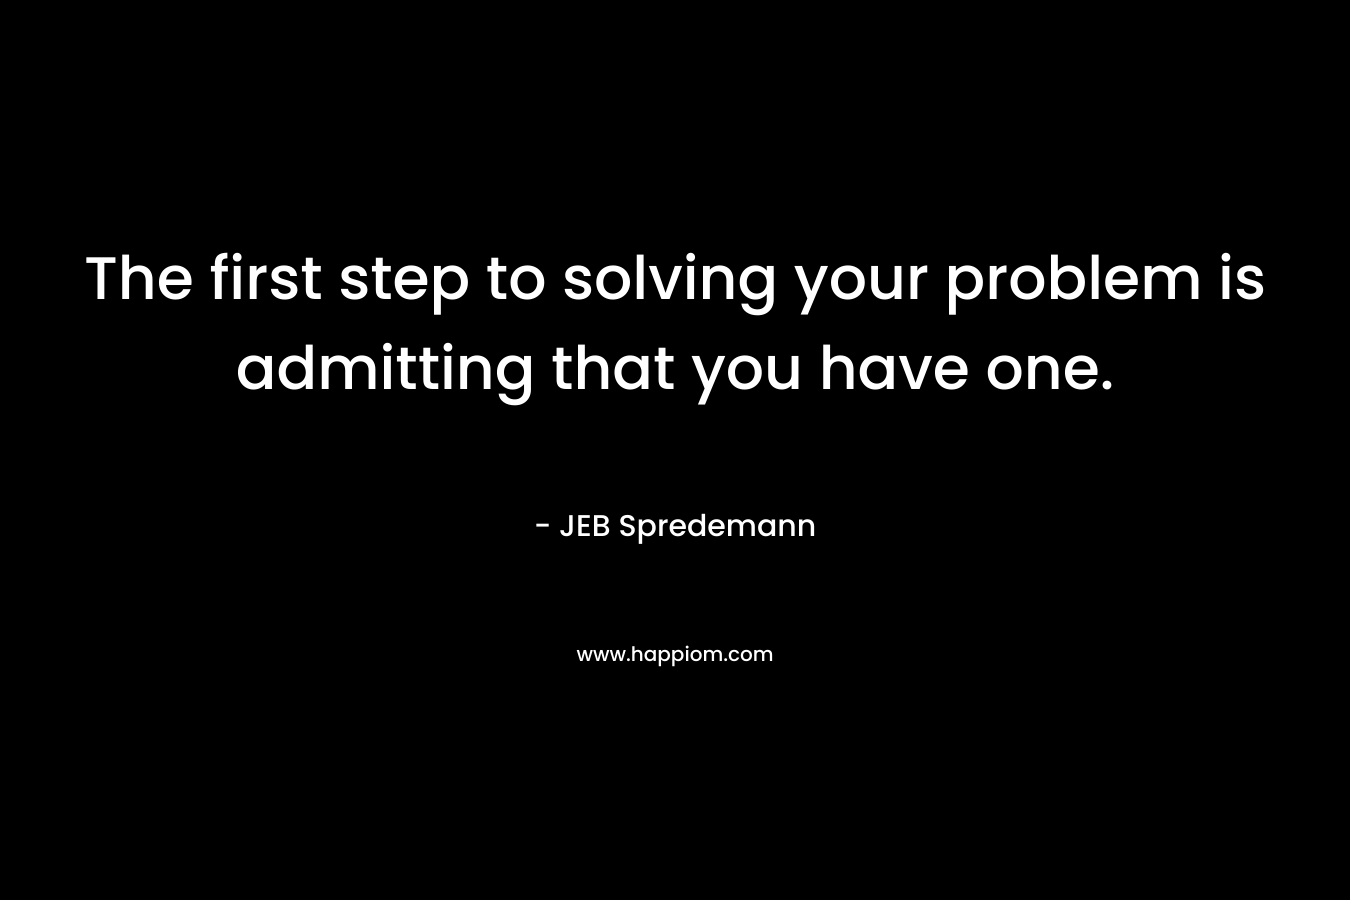 The first step to solving your problem is admitting that you have one. – JEB Spredemann